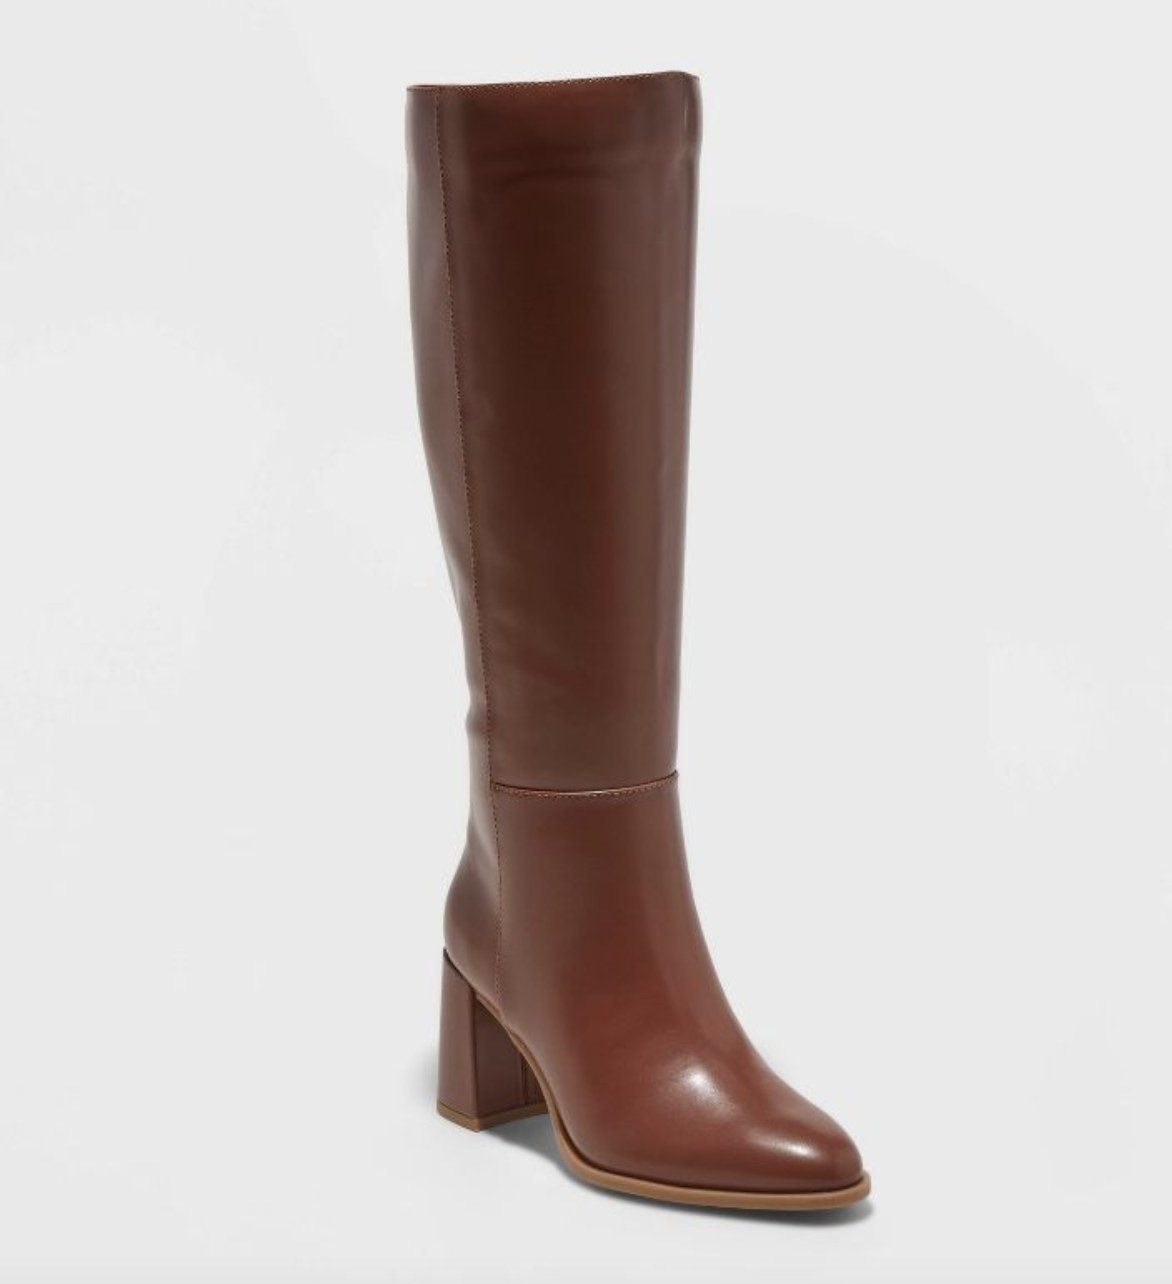 A brown tall boot